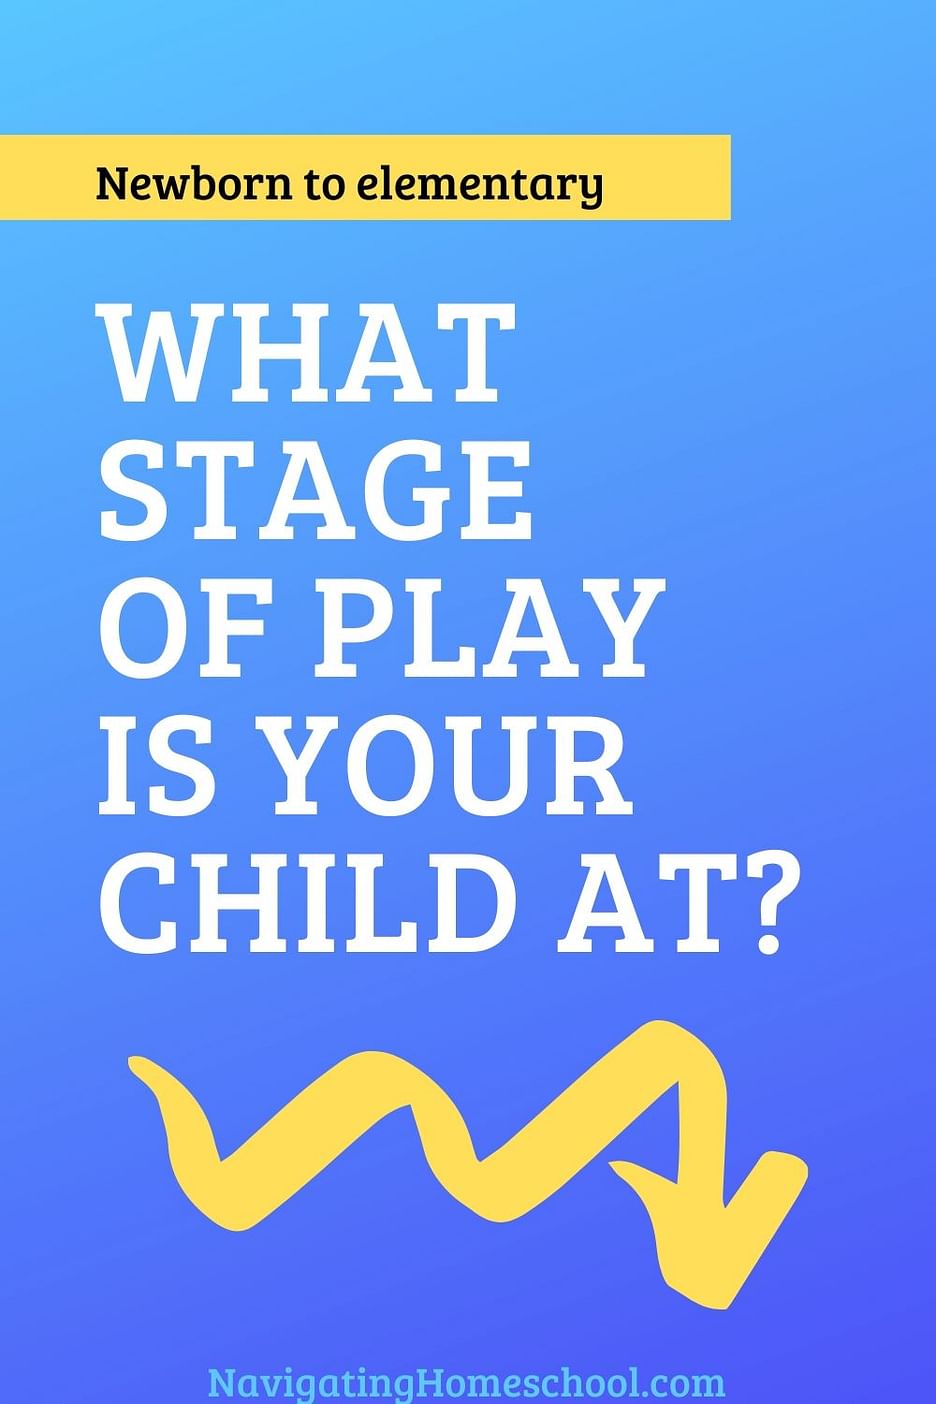 Developmental Stages of Play